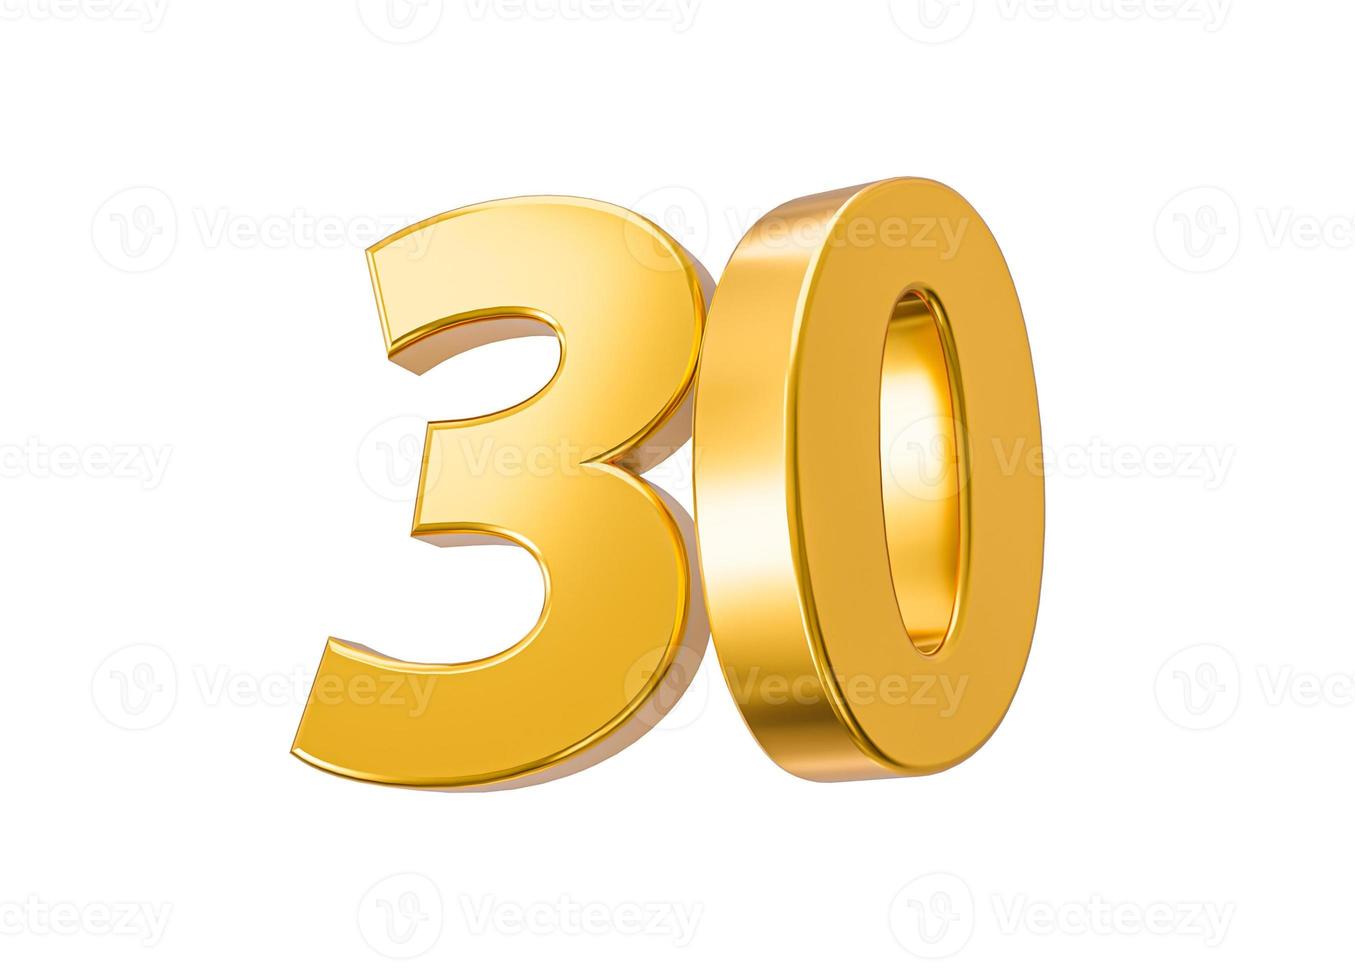 30 percent off on sale. Gold percent isolated on white background 30th Anniversary celebration 3D Golden numbers 3d Illustration photo